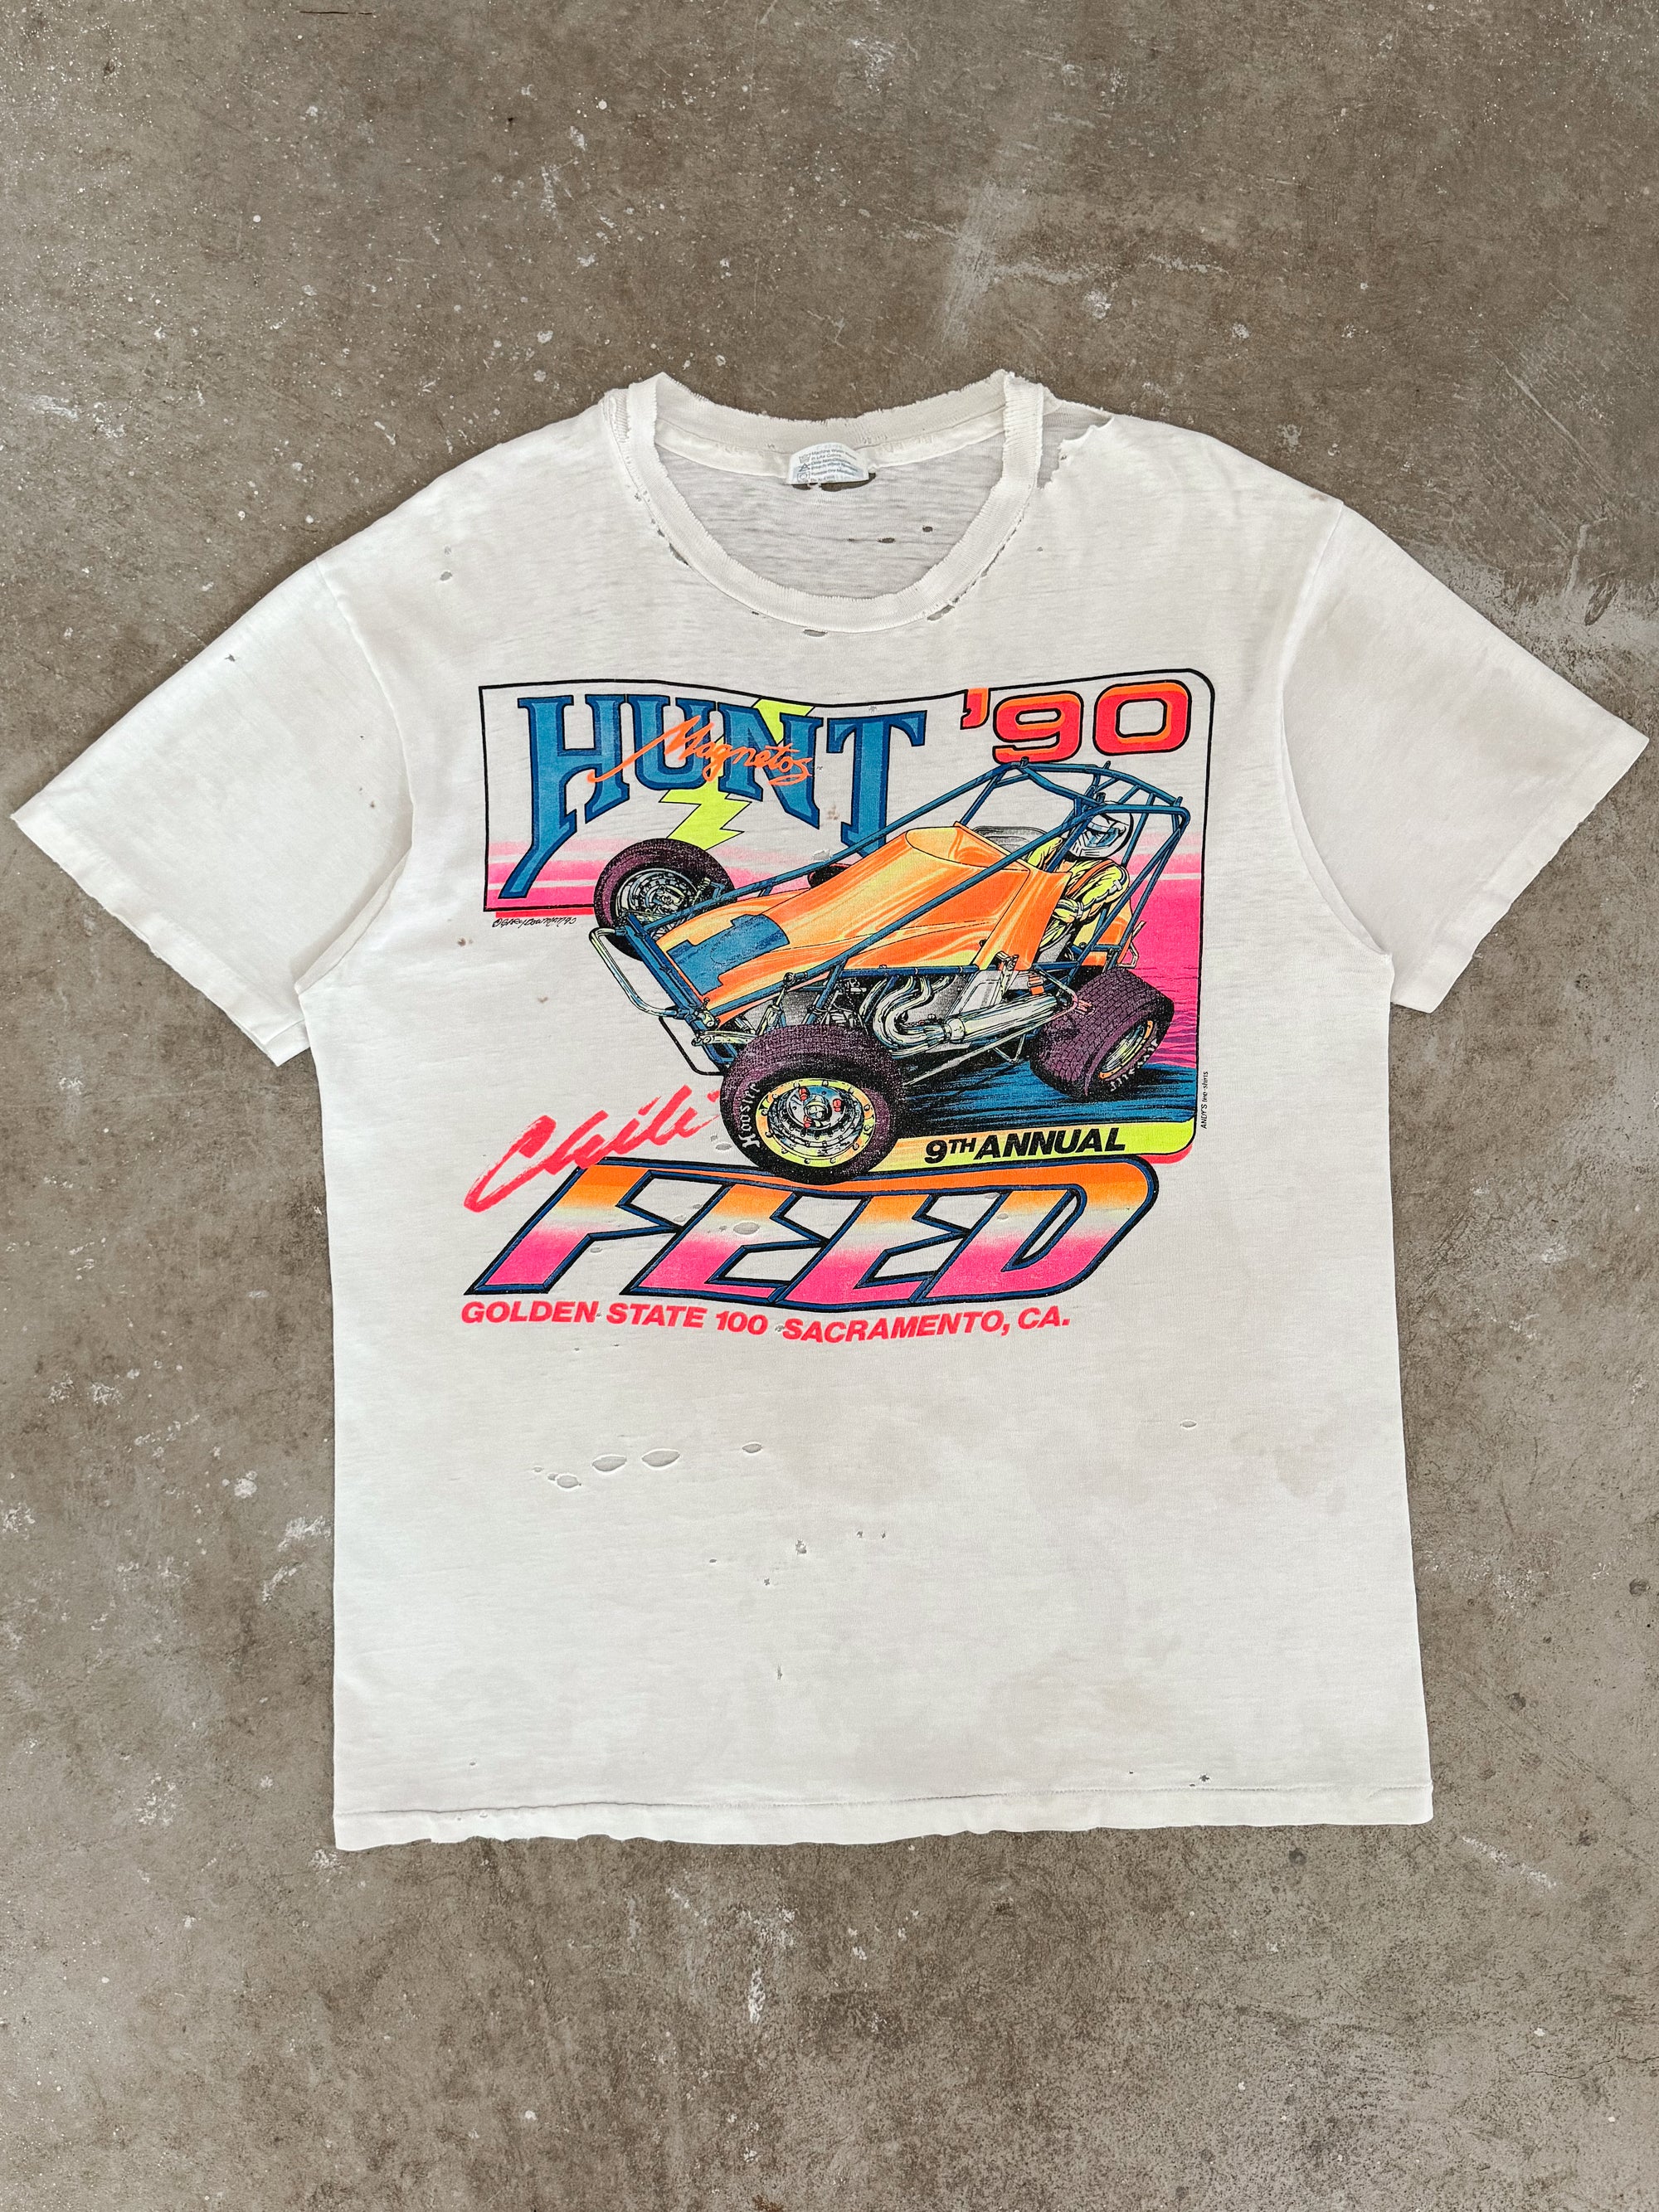 1990s "Chili Feed" Thrashed Tee (M/L)